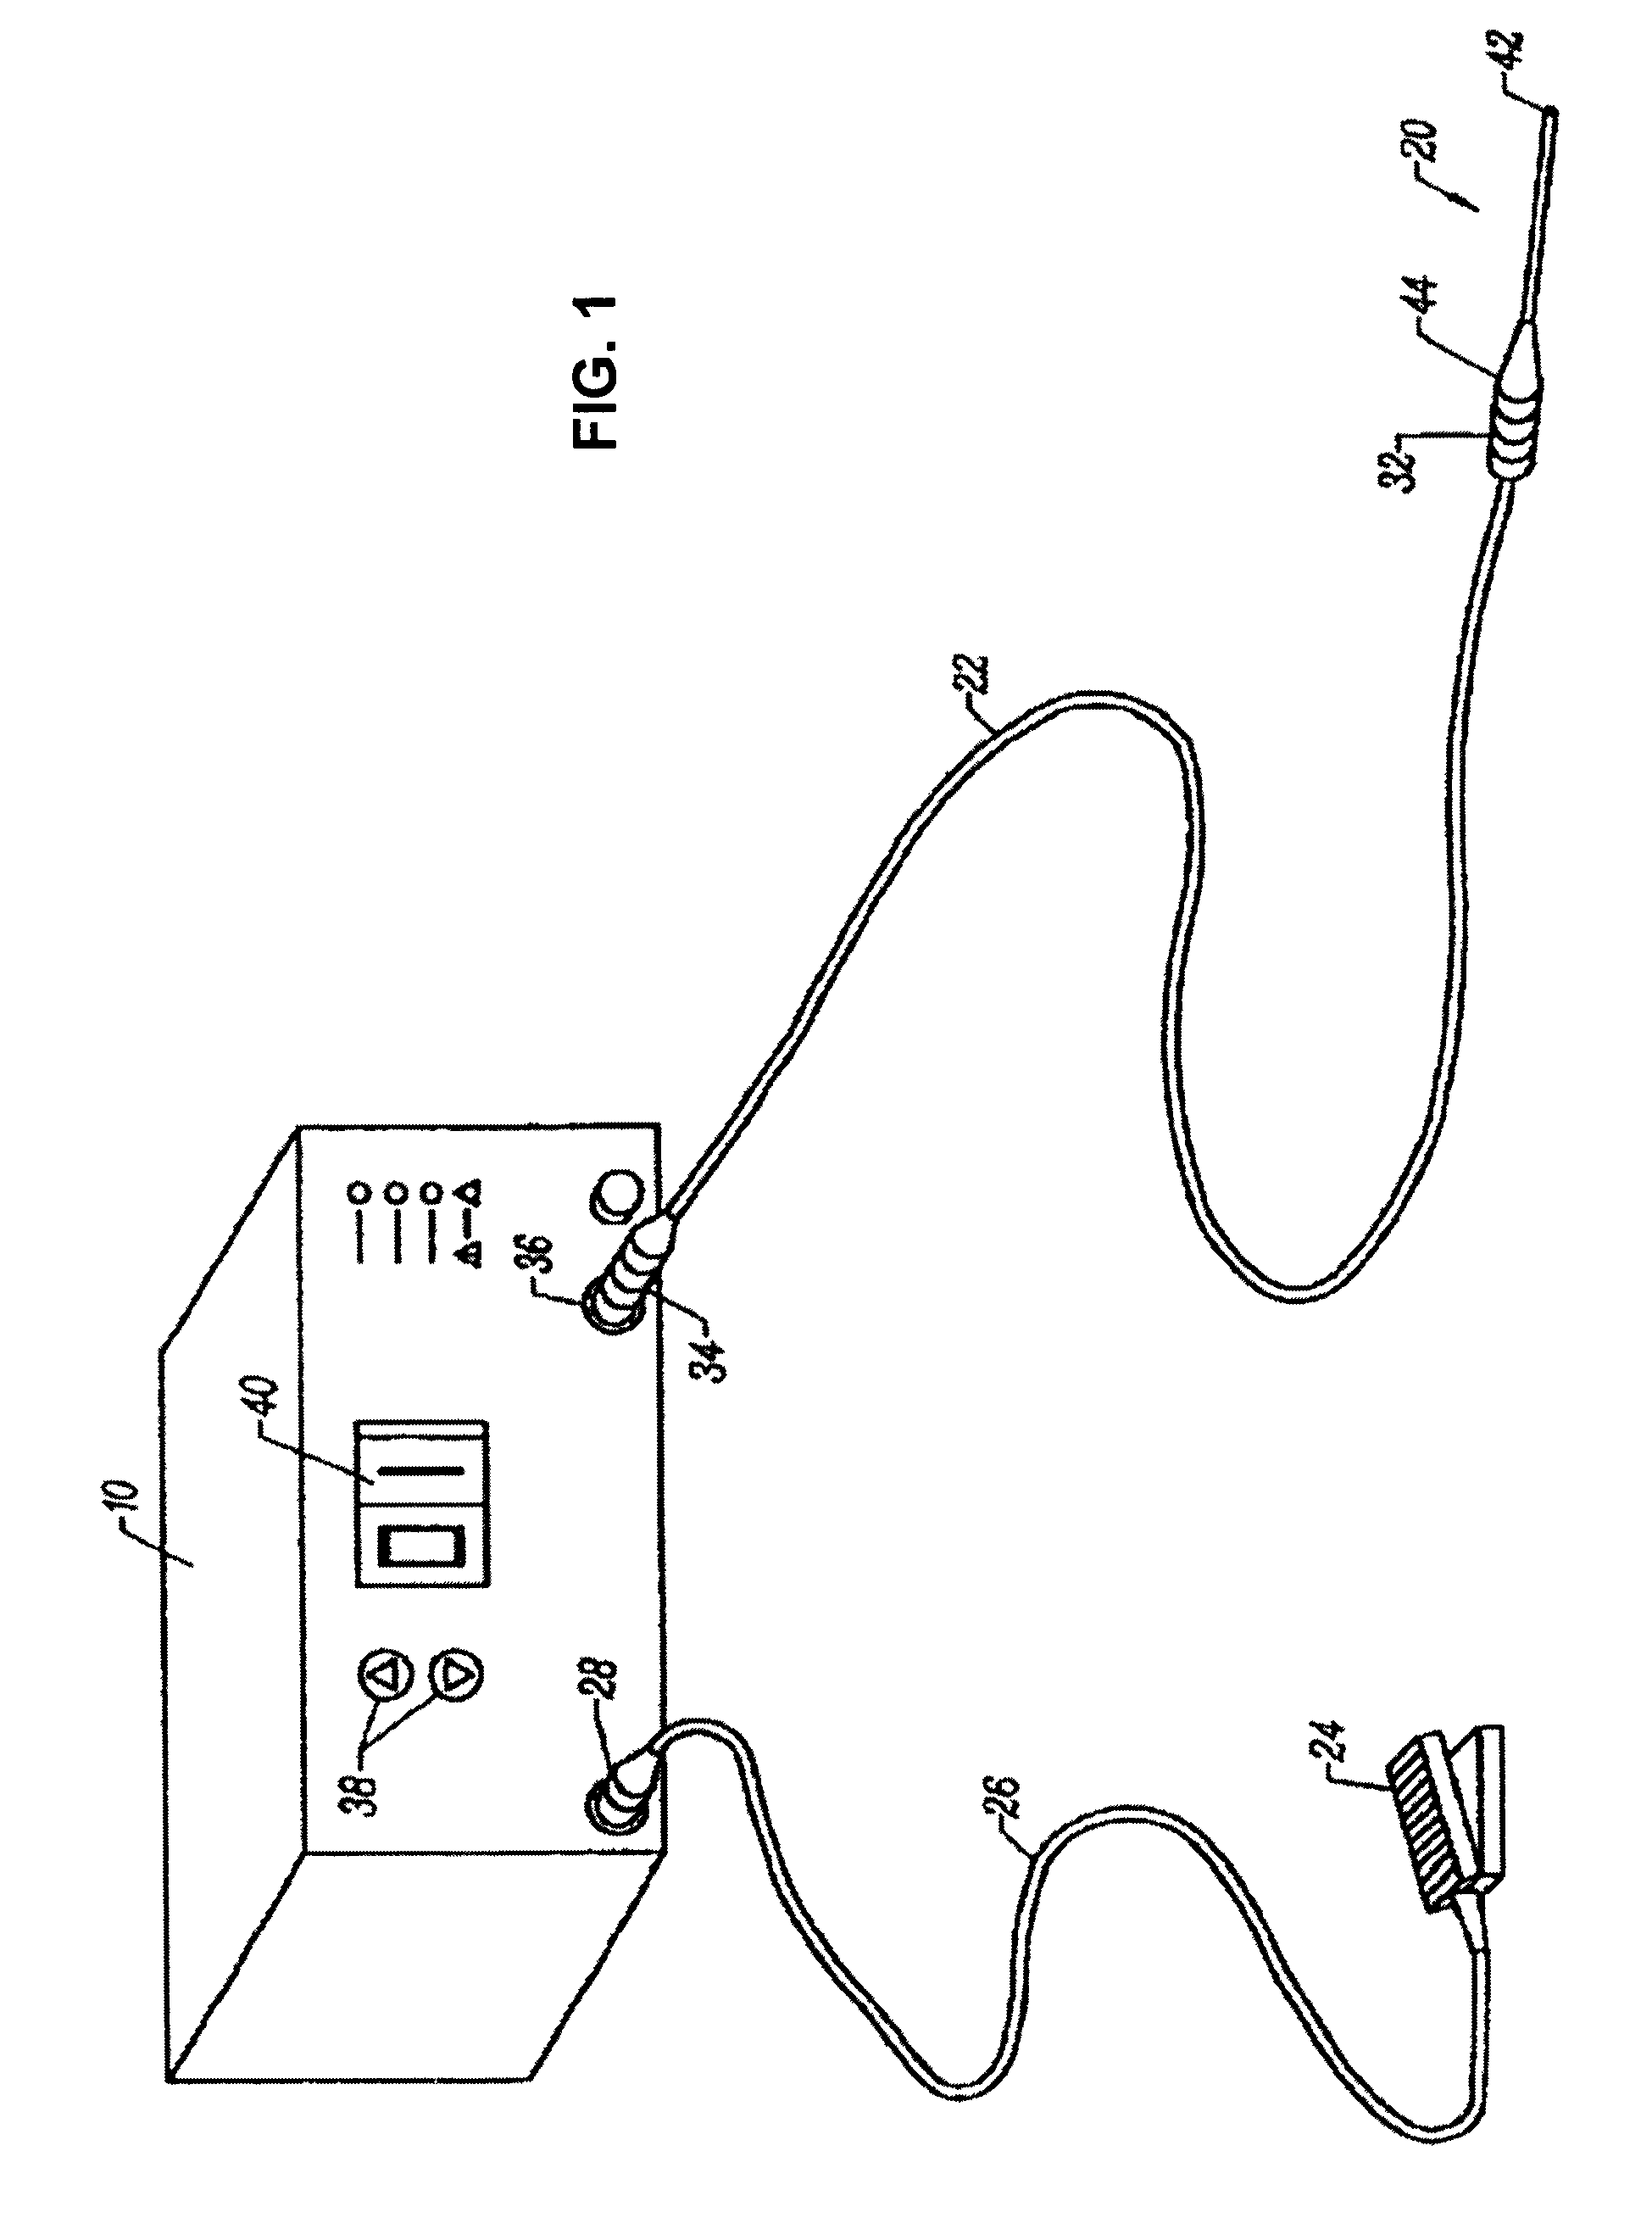 Ablation apparatus having reduced nerve stimulation and related methods